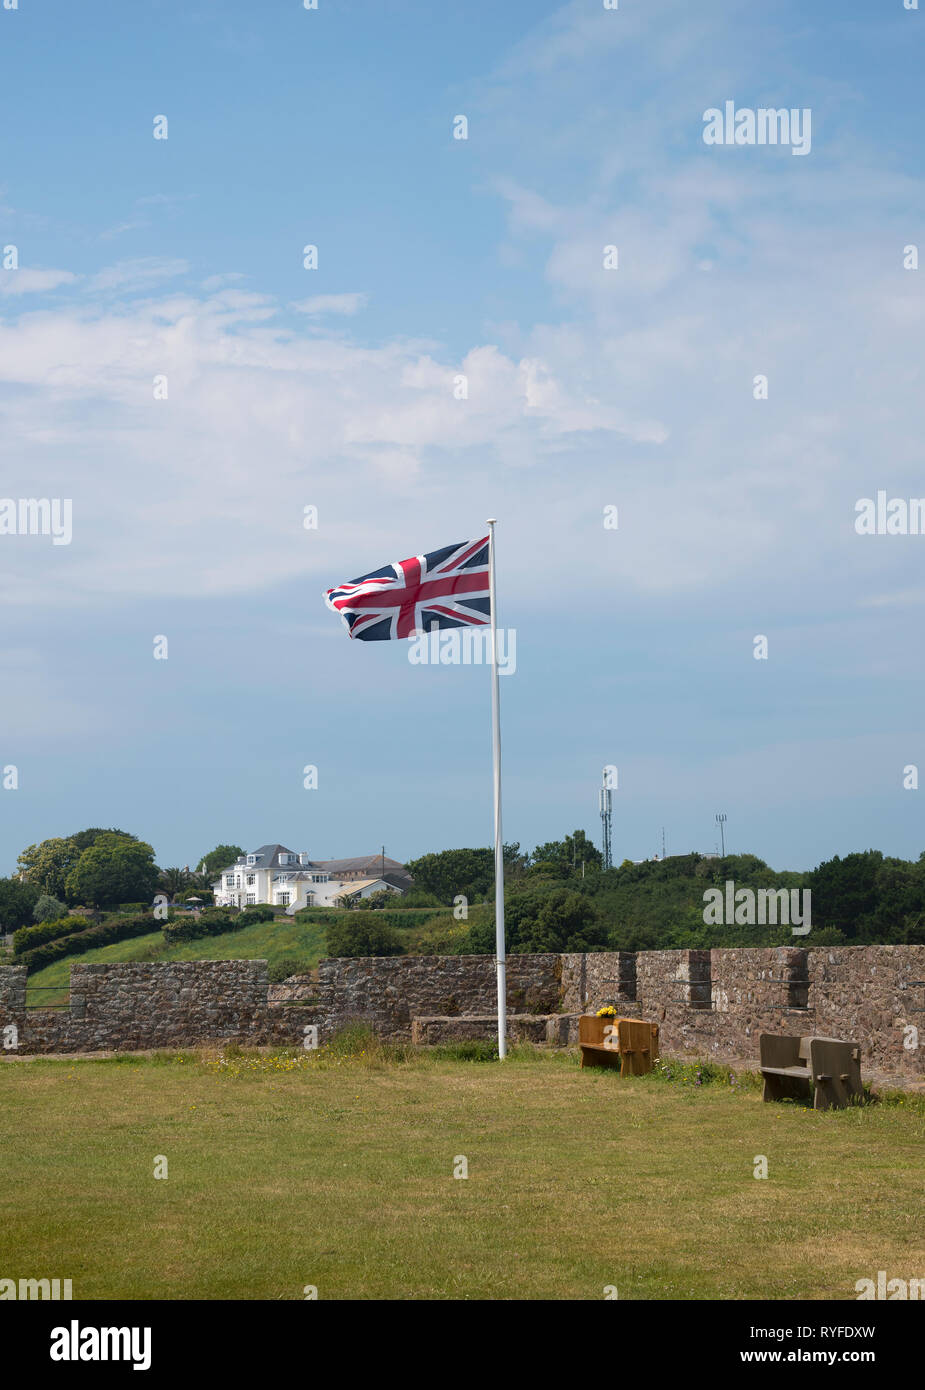 The Union Jack flag flying at full-mast, at Mont Orgueil Castle in Gorey, on the island of Jersey in the English Chanel Stock Photo